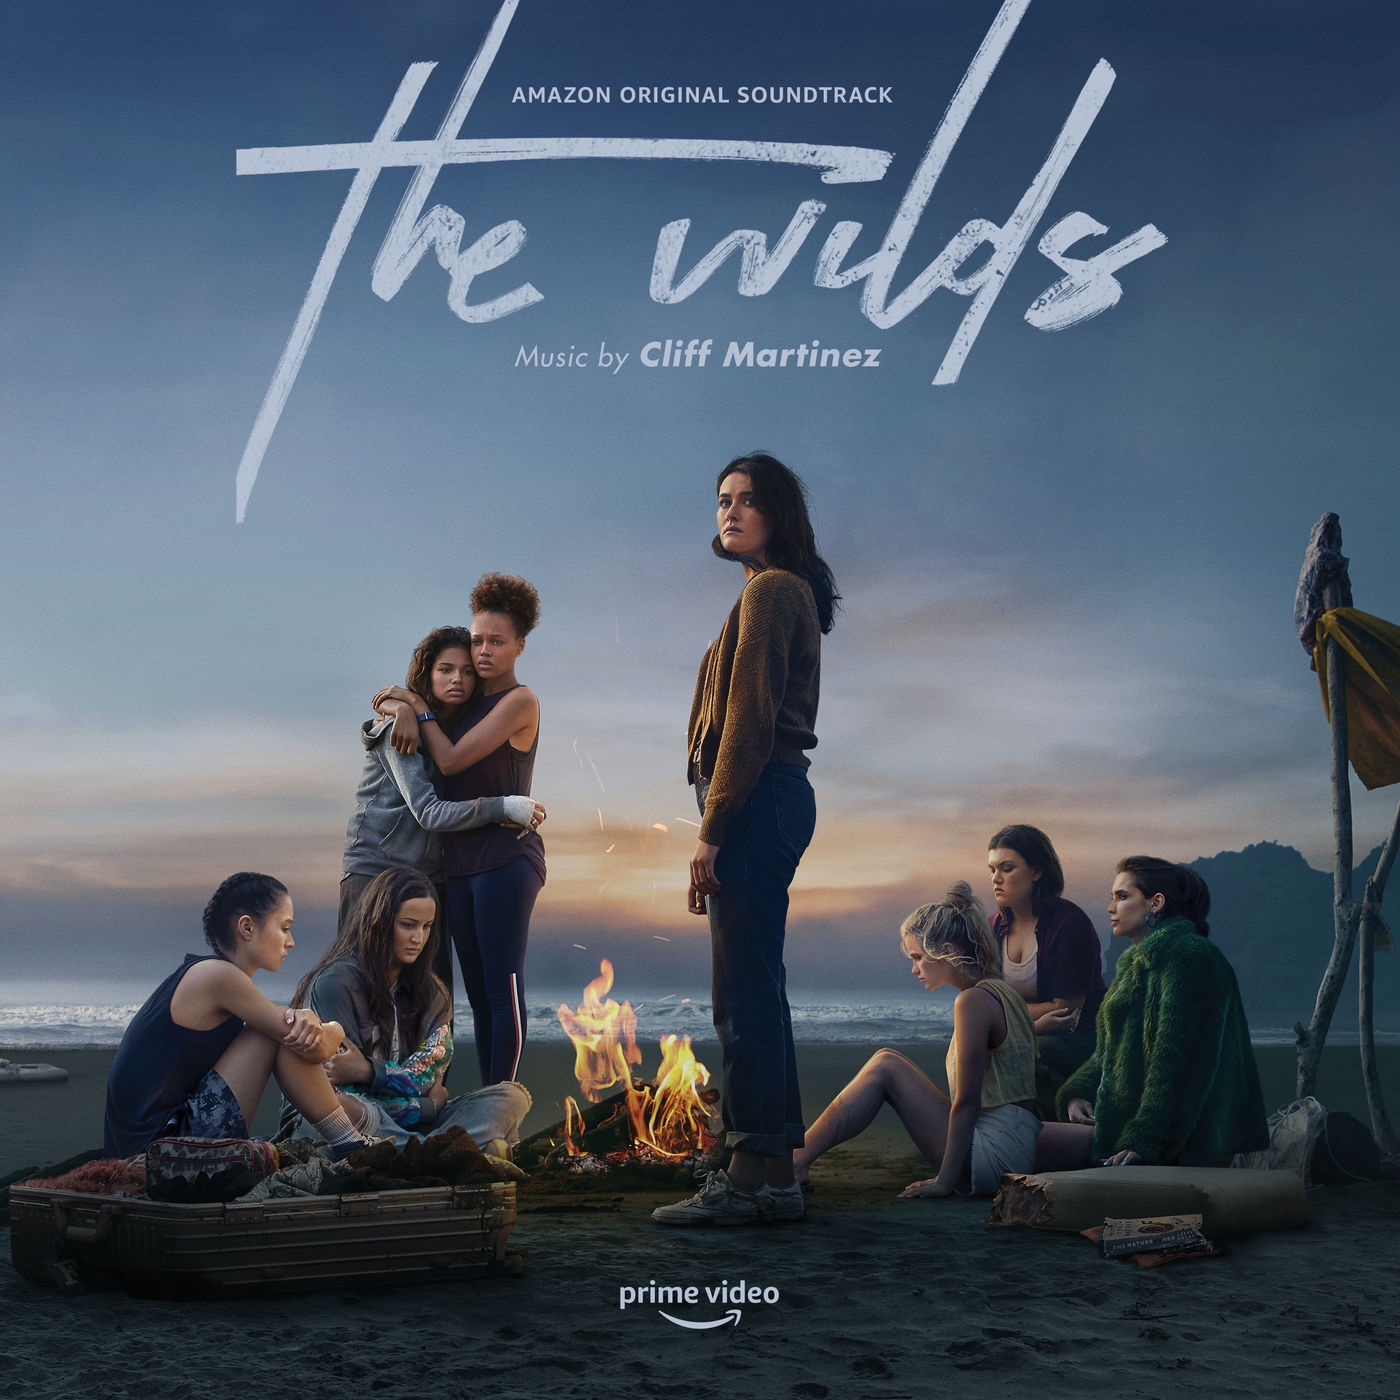 Cliff Martinez - The Wilds (Music from the Amazon Original Series) (2020) [FLAC 24bit/48kHz]